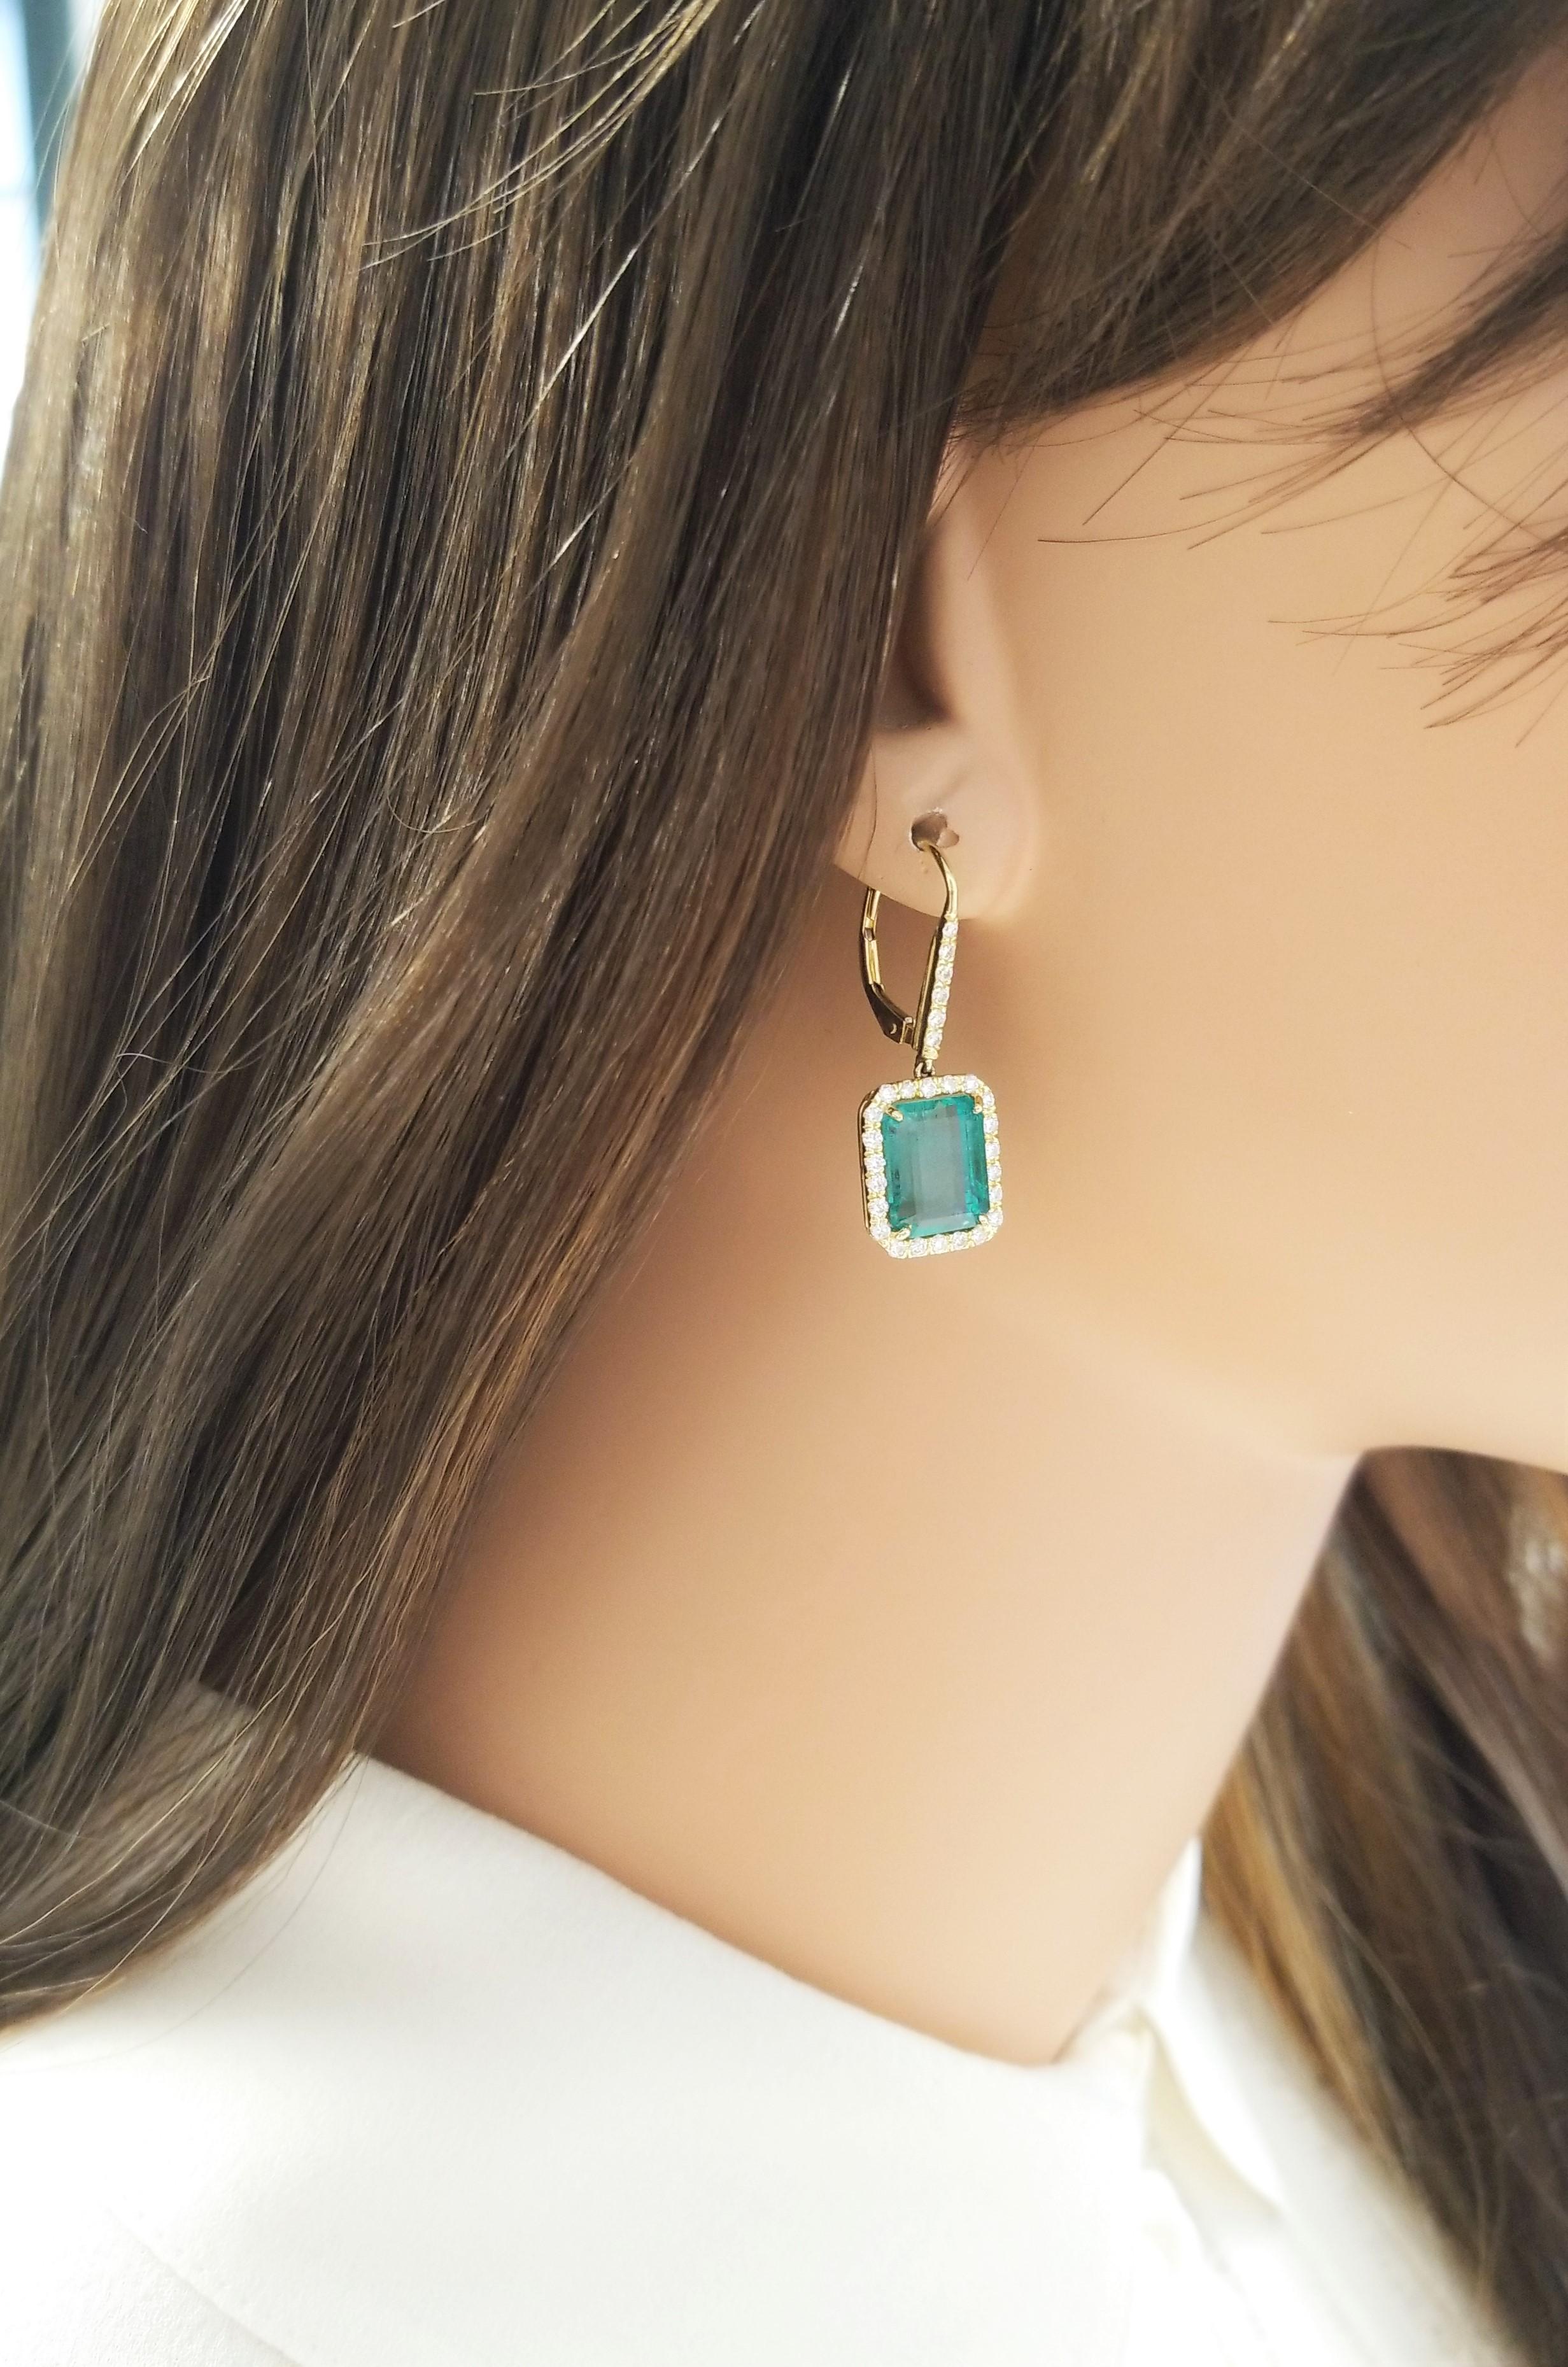 These dangle earrings feature two GIA certified emerald cut green emeralds, prong set in lavish drops, totaling 8.55 carats and measuring 10.24-8.23mm each. The gem source is Brazil; they are perfectly matched in size, color, transparency, and